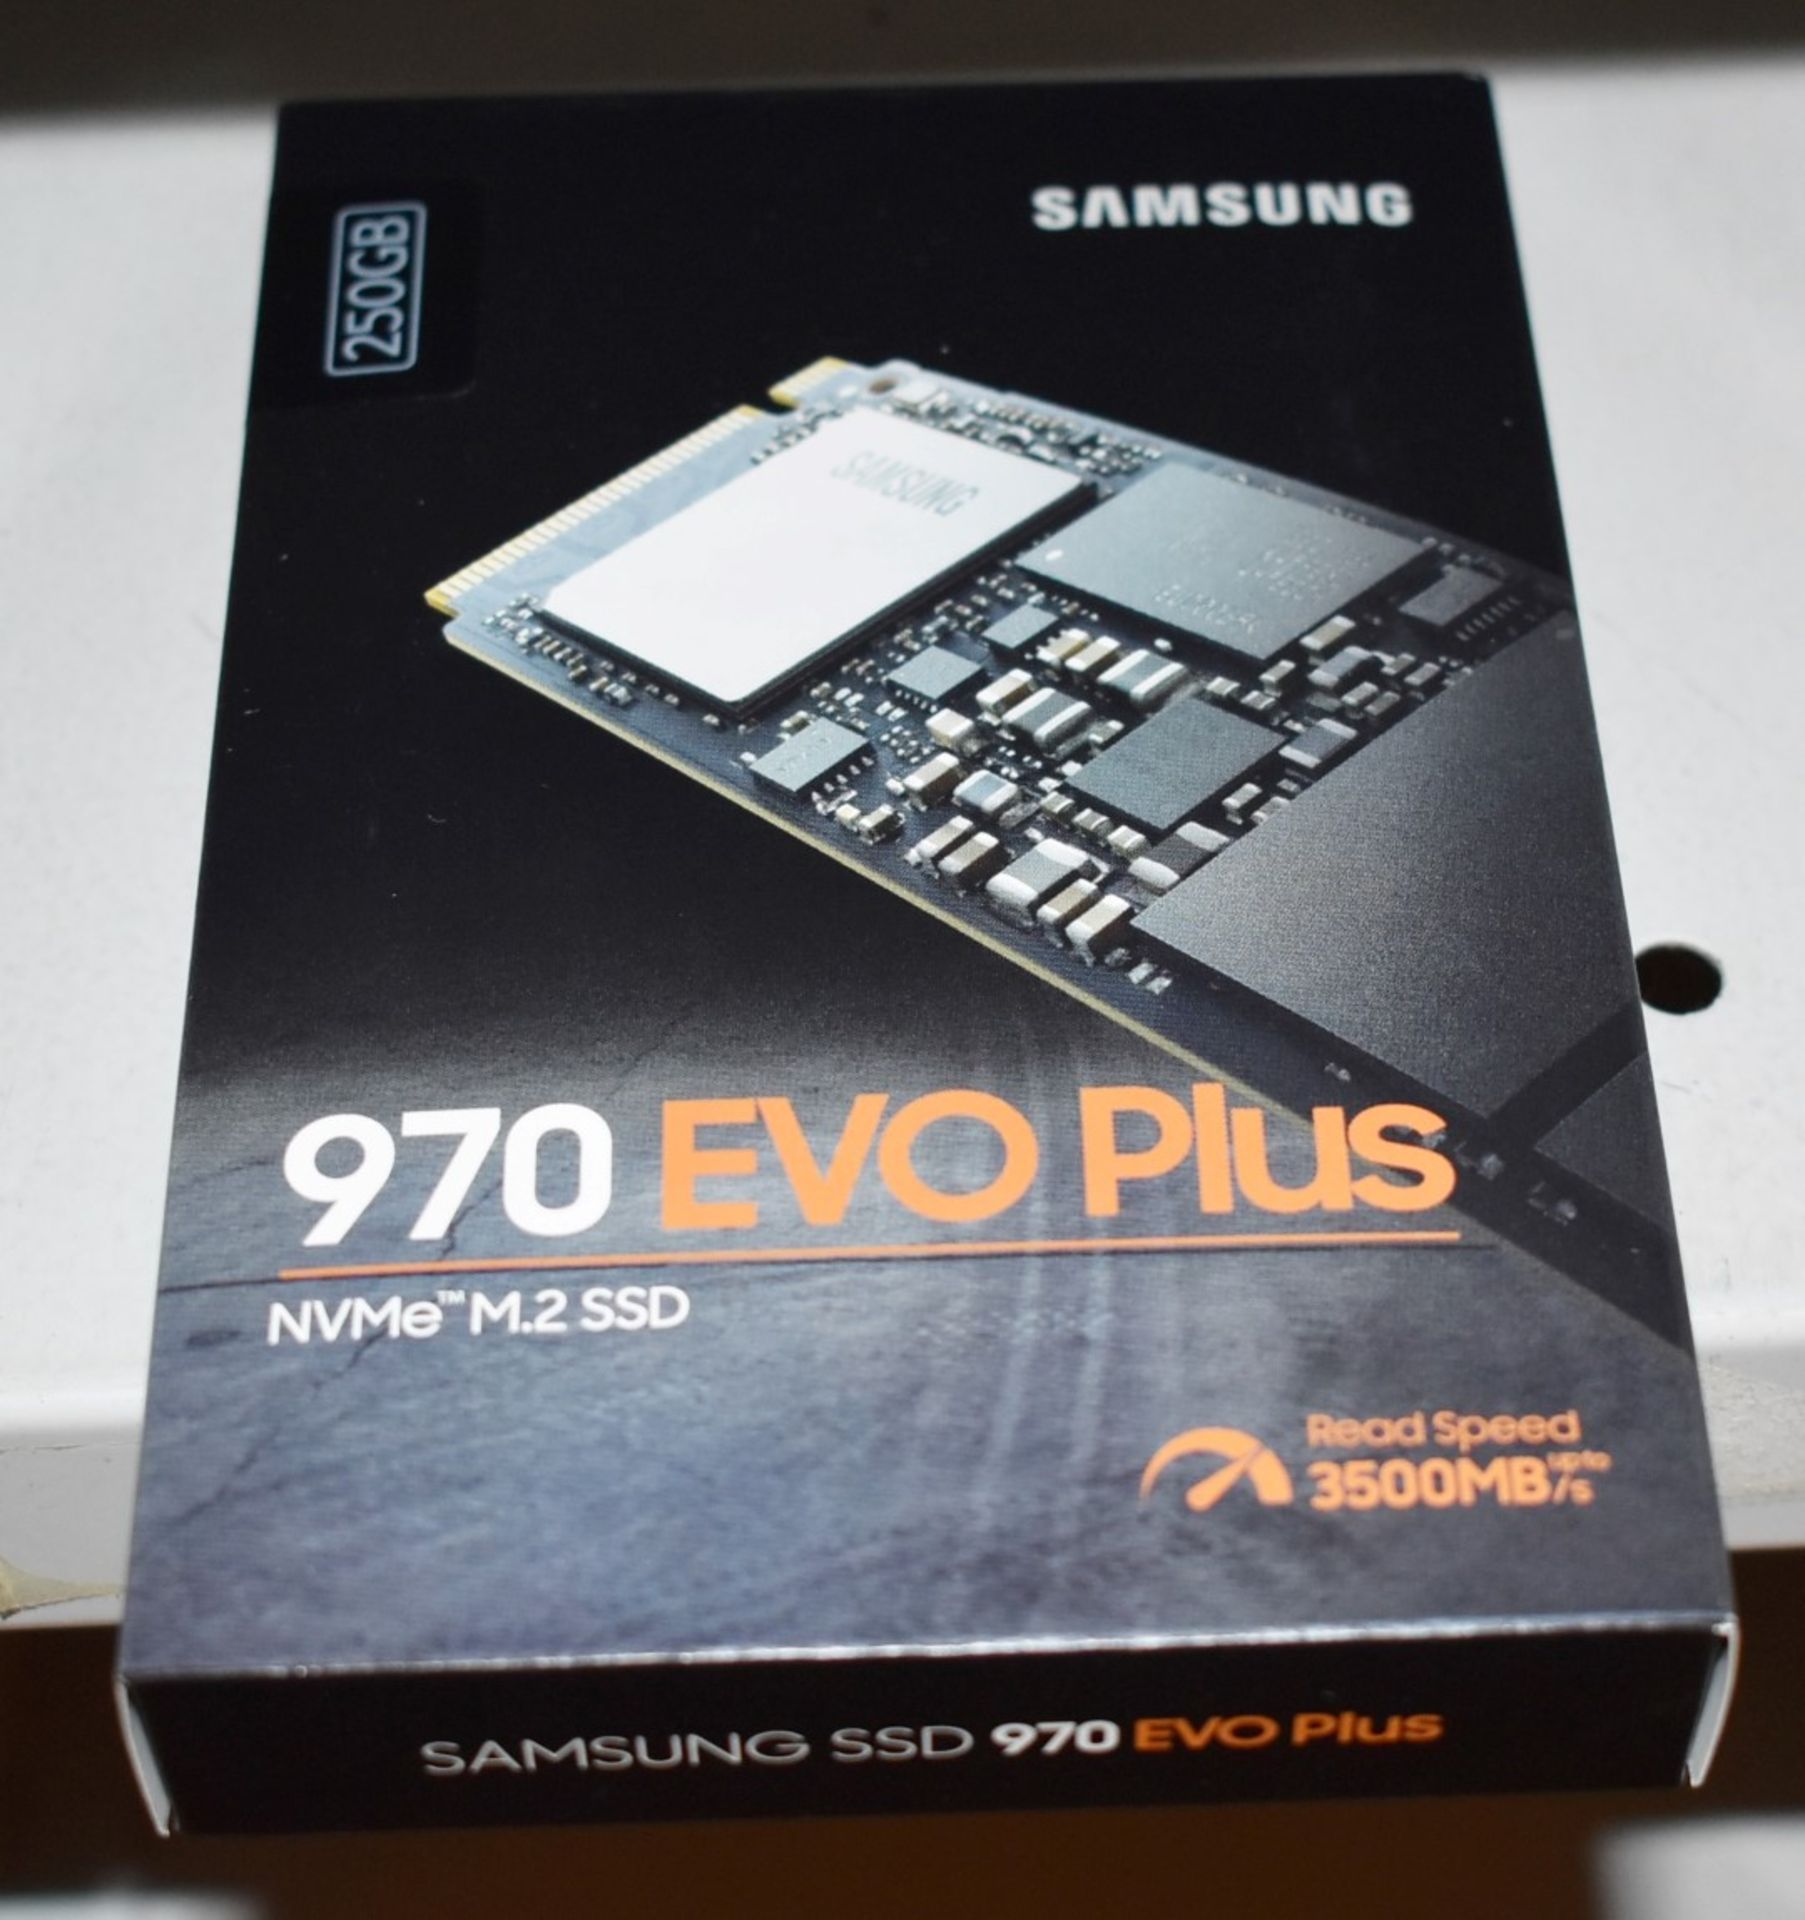 1 x Samsung Evo 970 Plus 250GB Solid State M.2 SSD Hard Drive - 3500mb/s Read Speed - New Boxed - Image 2 of 3